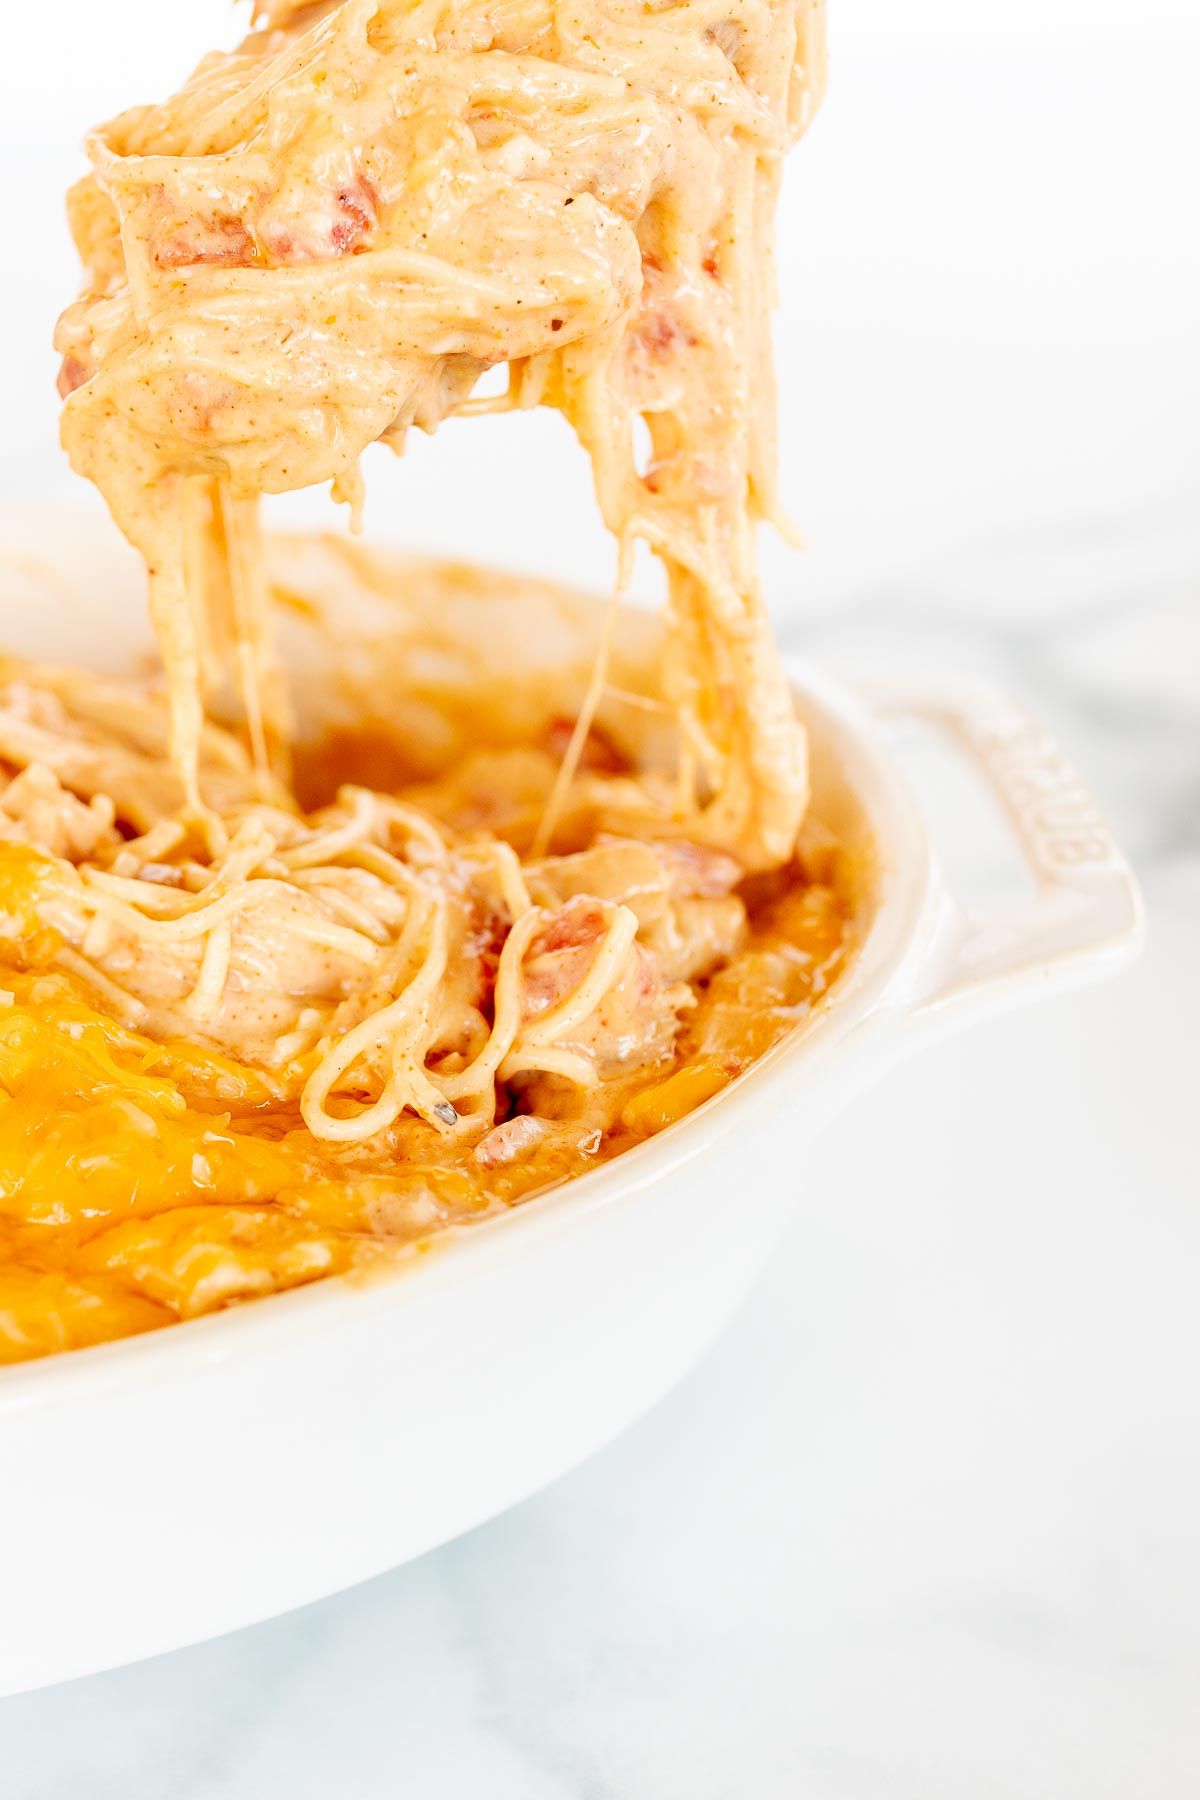 Mexican spaghetti in an oval baking dish, topped with shredded cheese, a scoop being pulled out with a spoon.